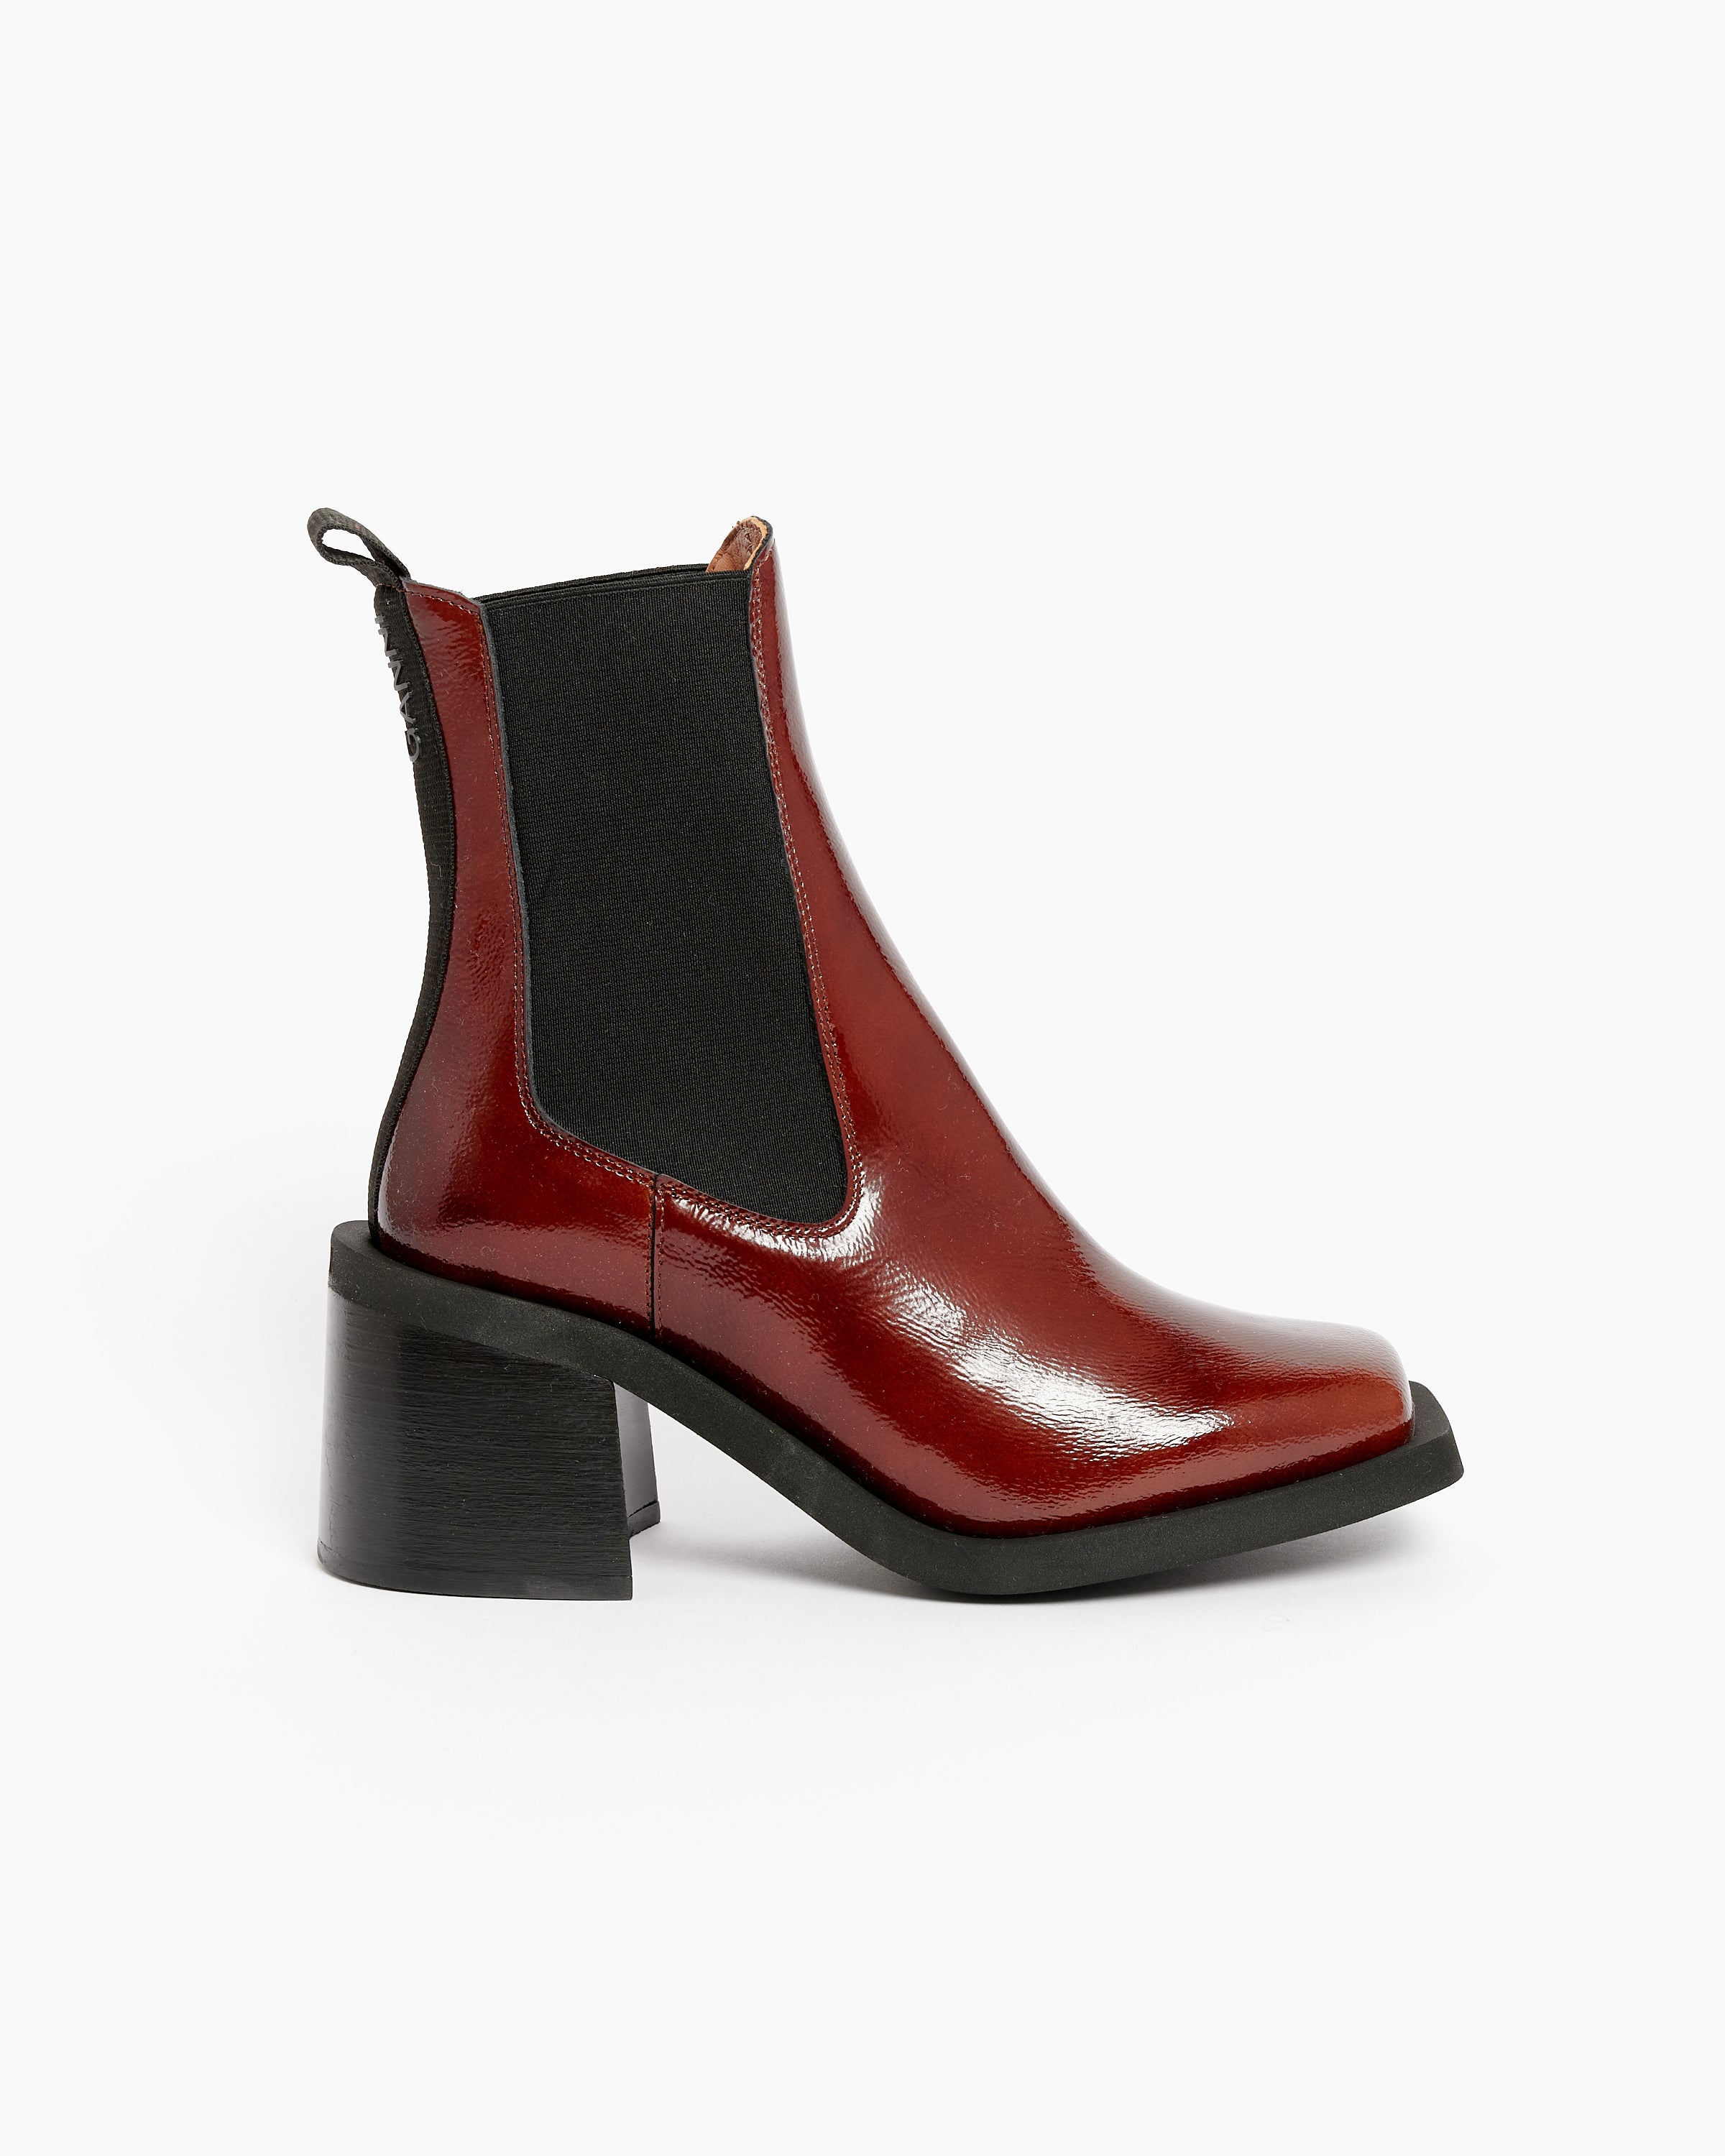 Wide Welt Squared Toe Chelsea Boot in Cognac